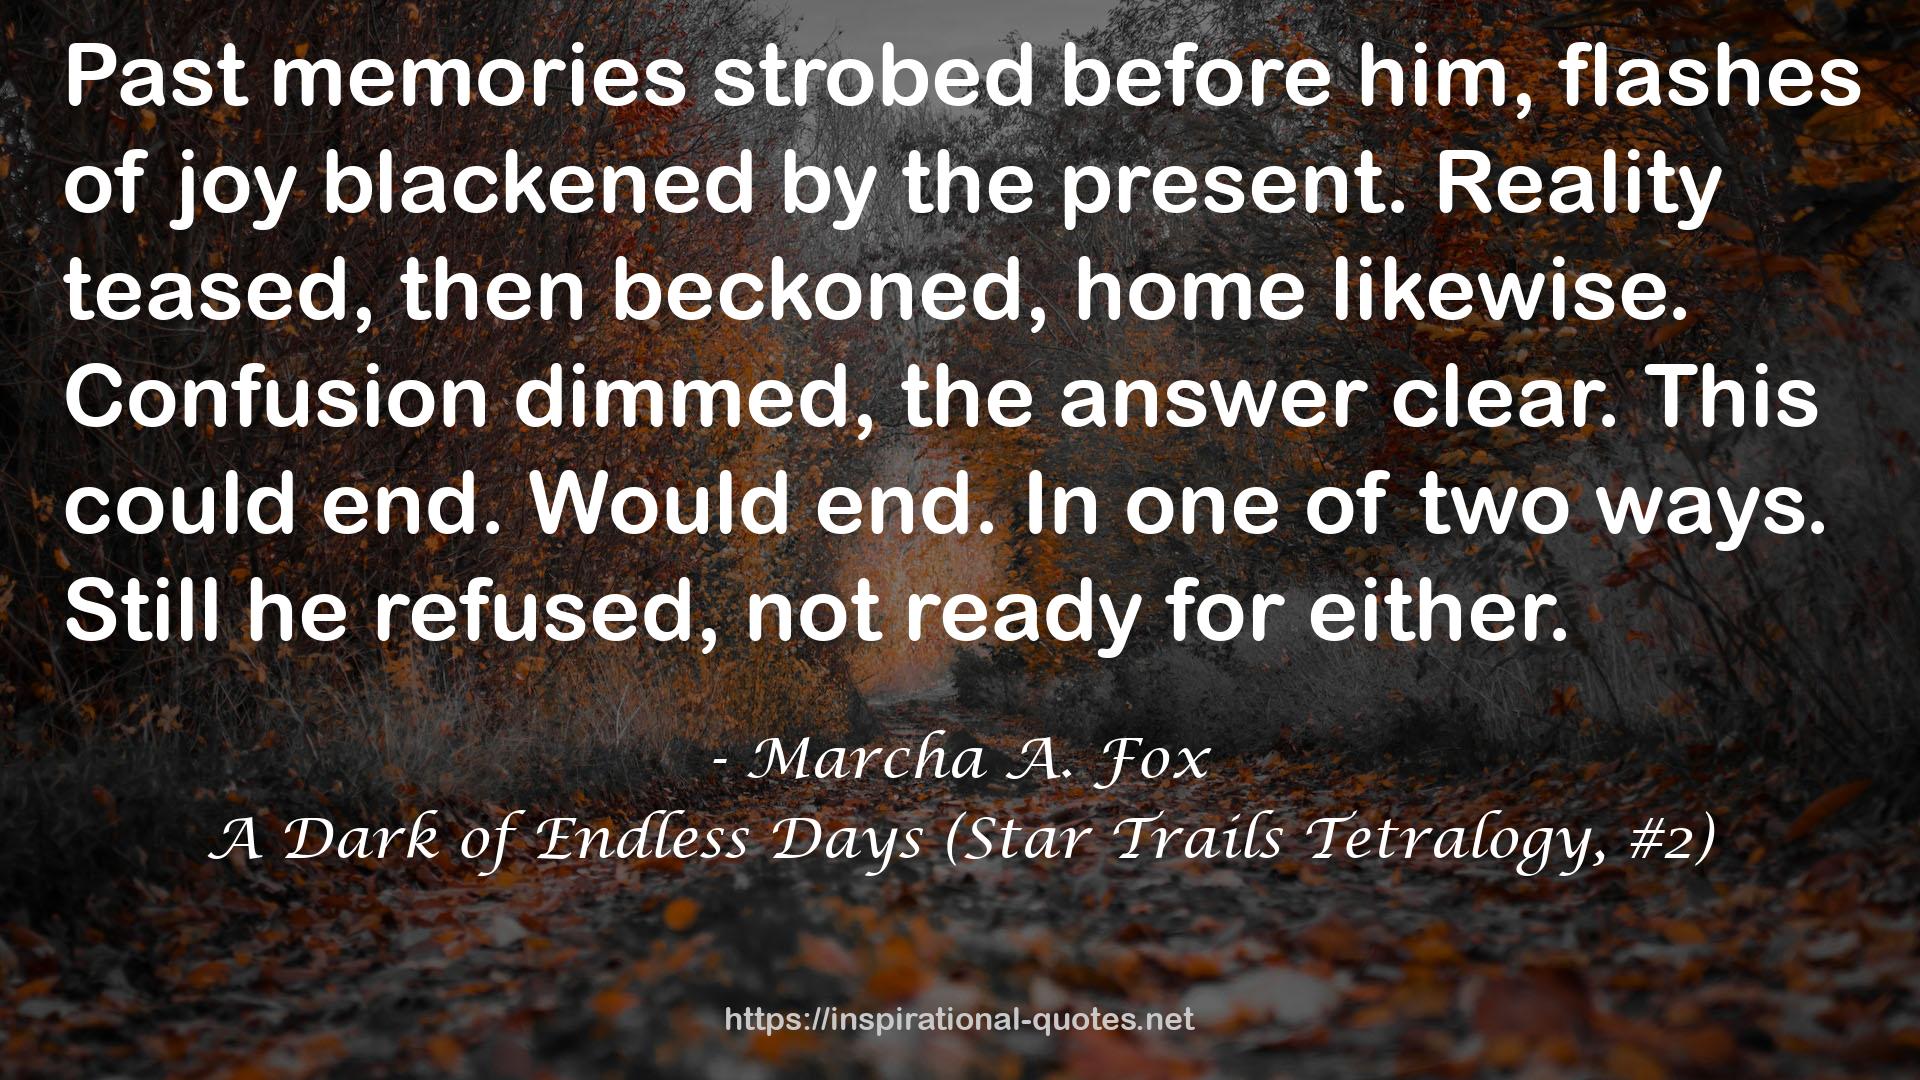 A Dark of Endless Days (Star Trails Tetralogy, #2) QUOTES